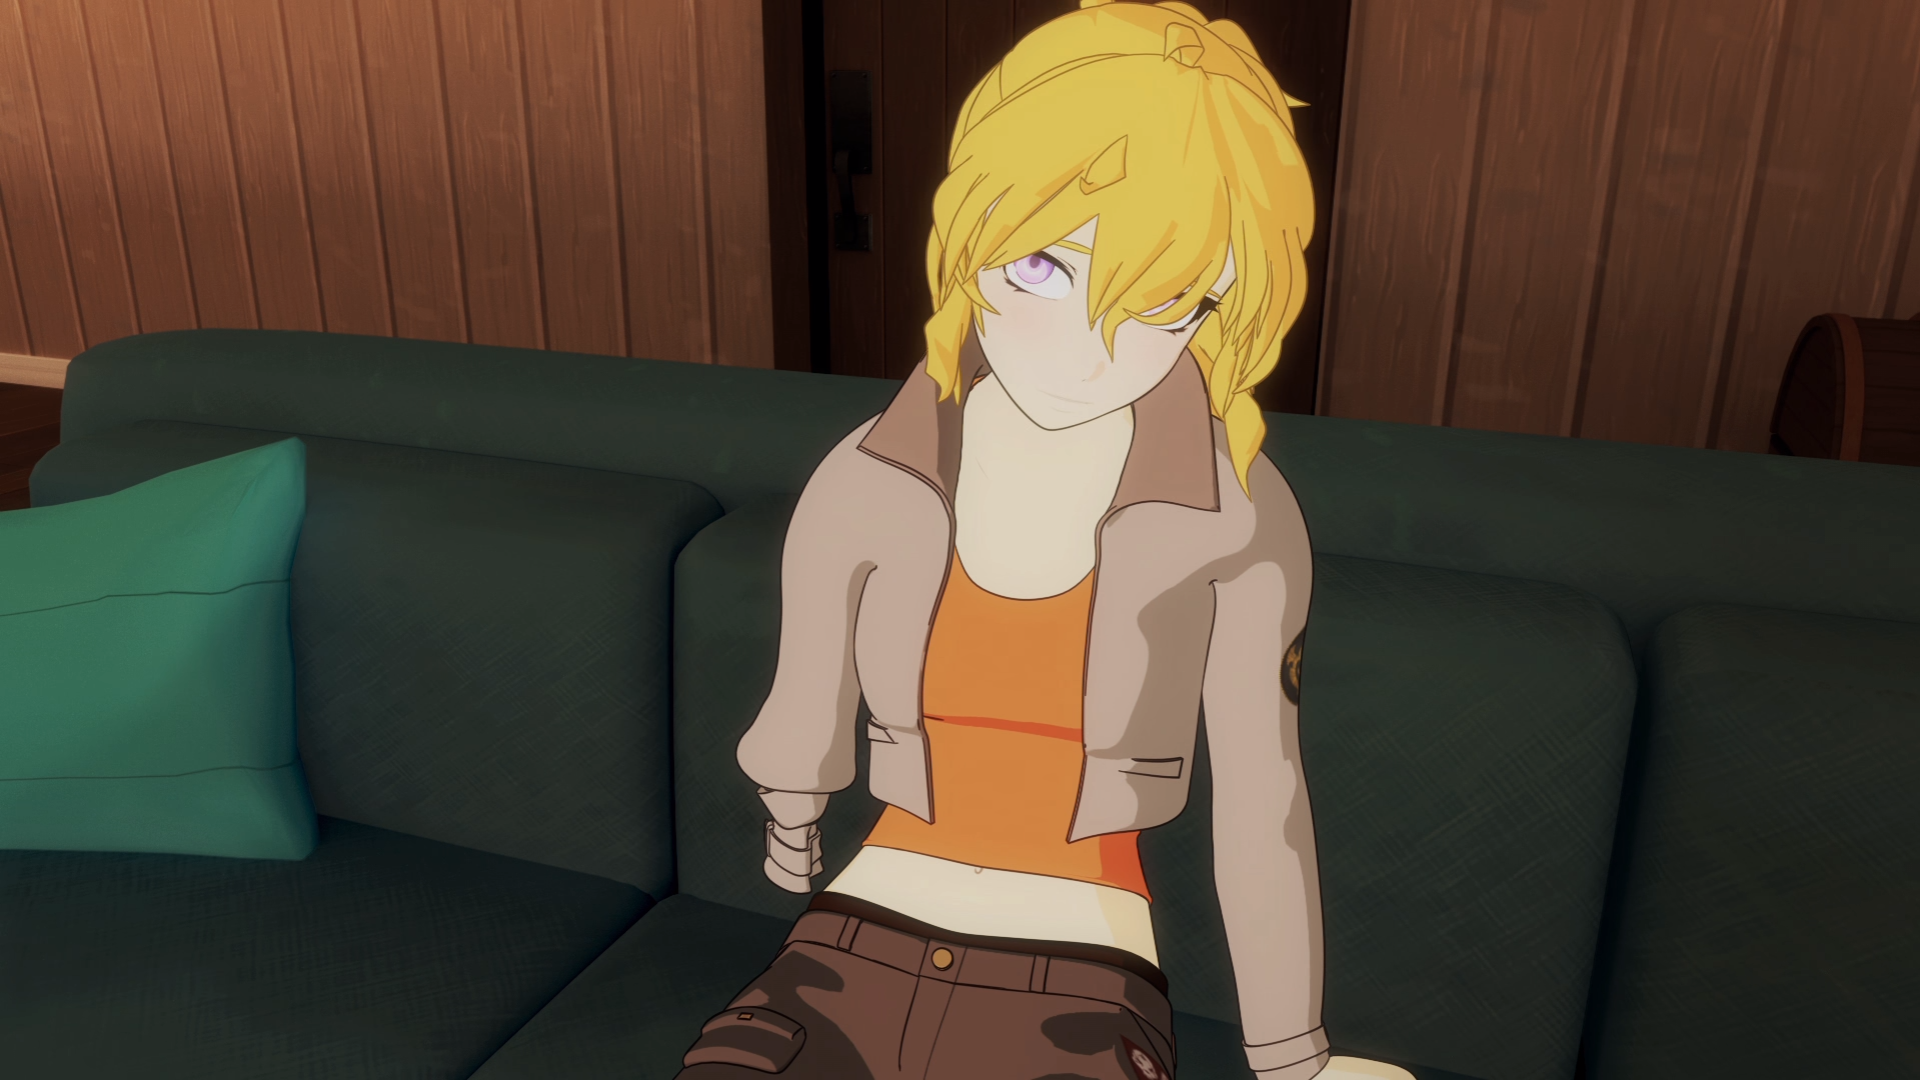 Yang sits in her father's house mourning the loss of her arm in the fourth volume of RWBY.